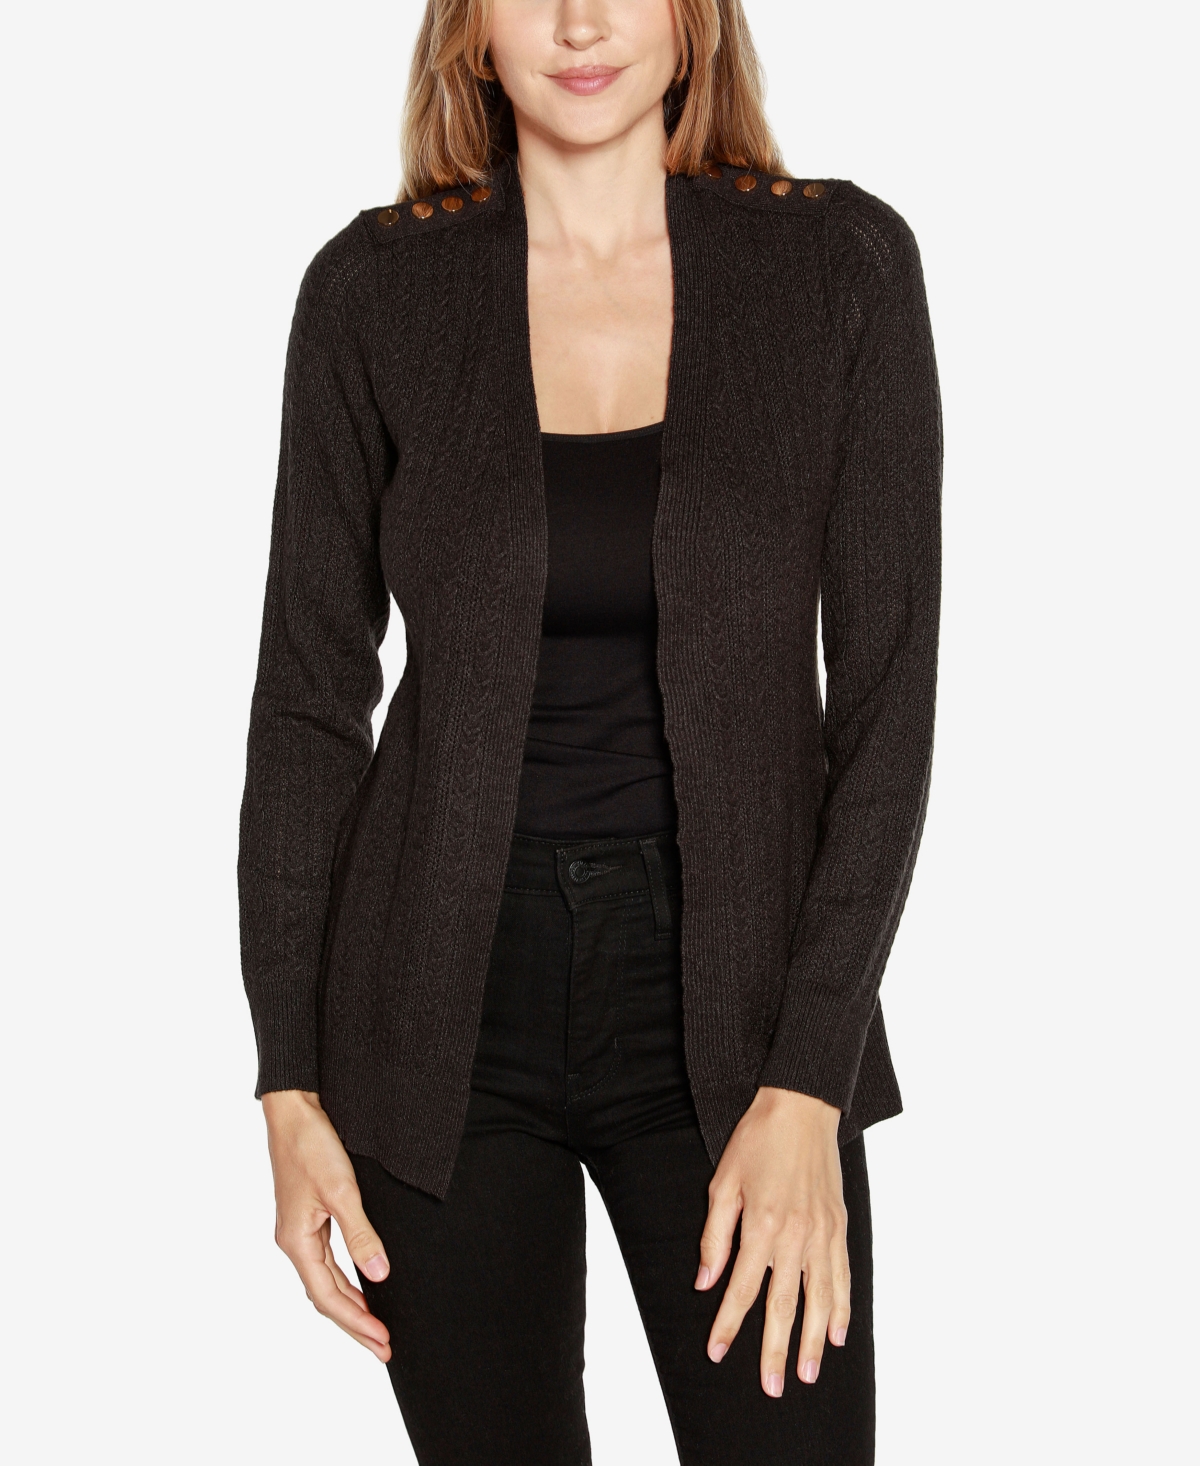 Black Label Women's Open Front Cable Knit Cardigan Sweater - Heather Charcoal